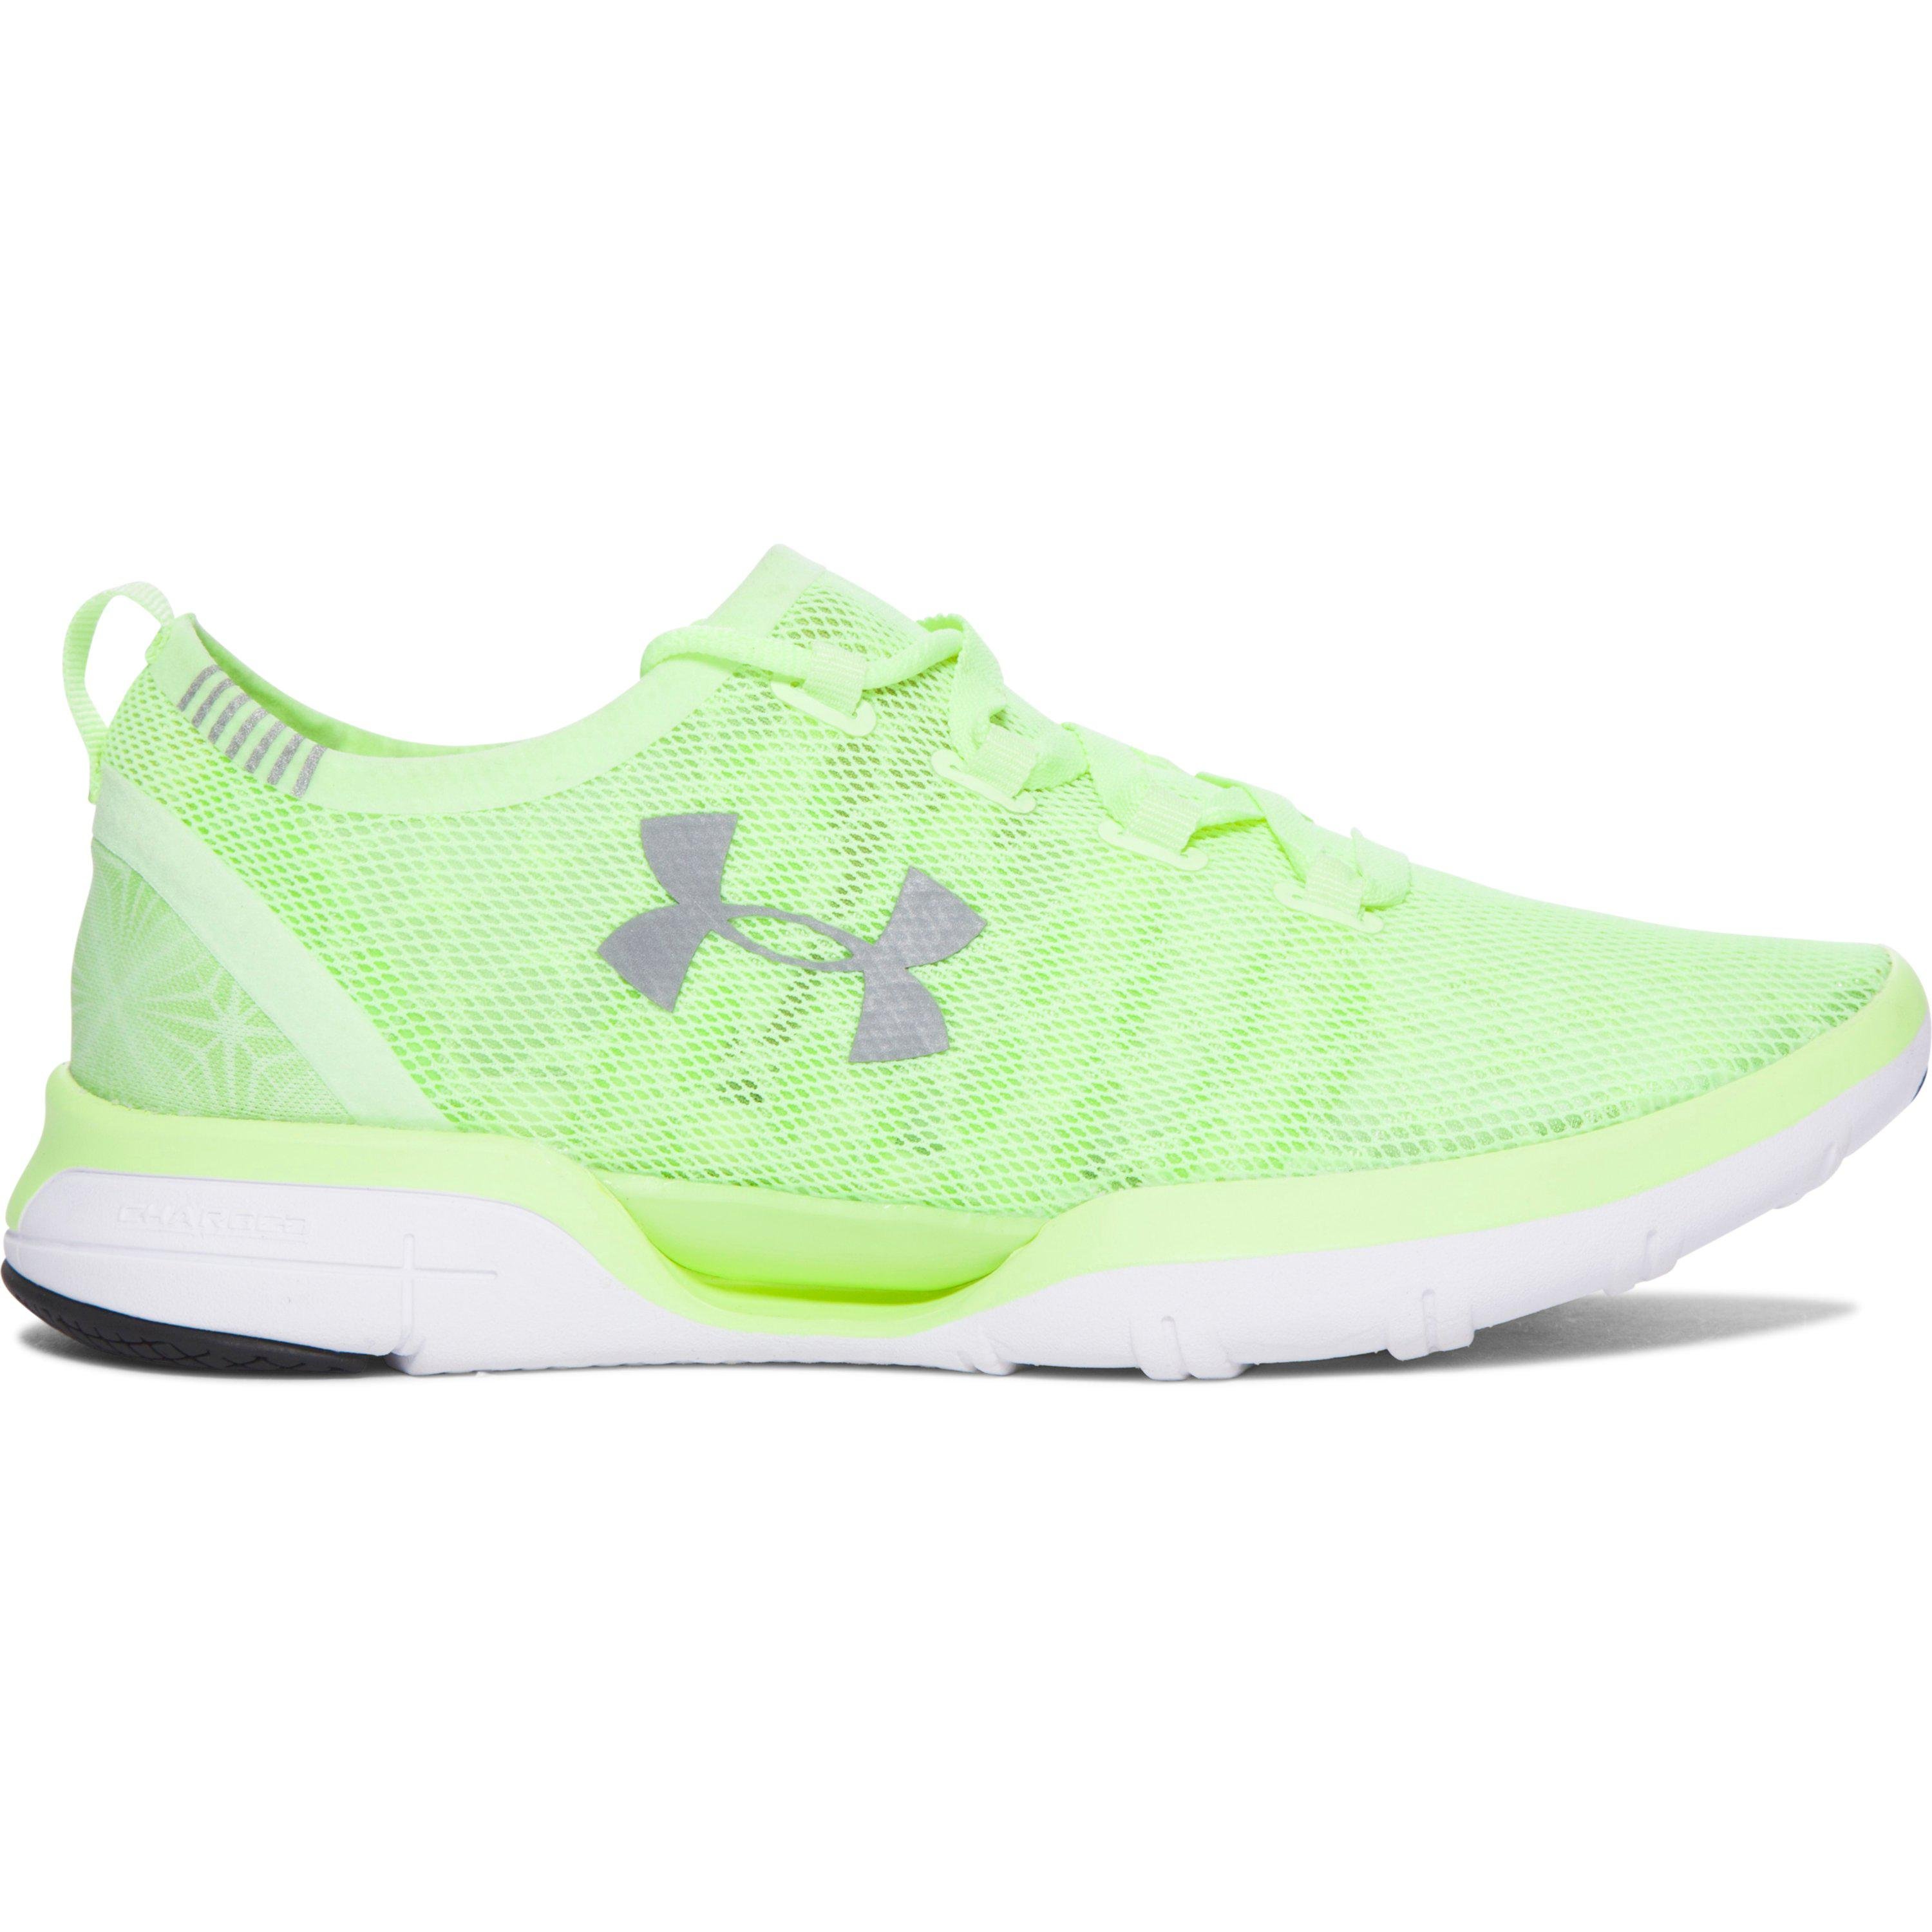 Under Armour Mens Charged CoolSwitch Refresh Sneaker 